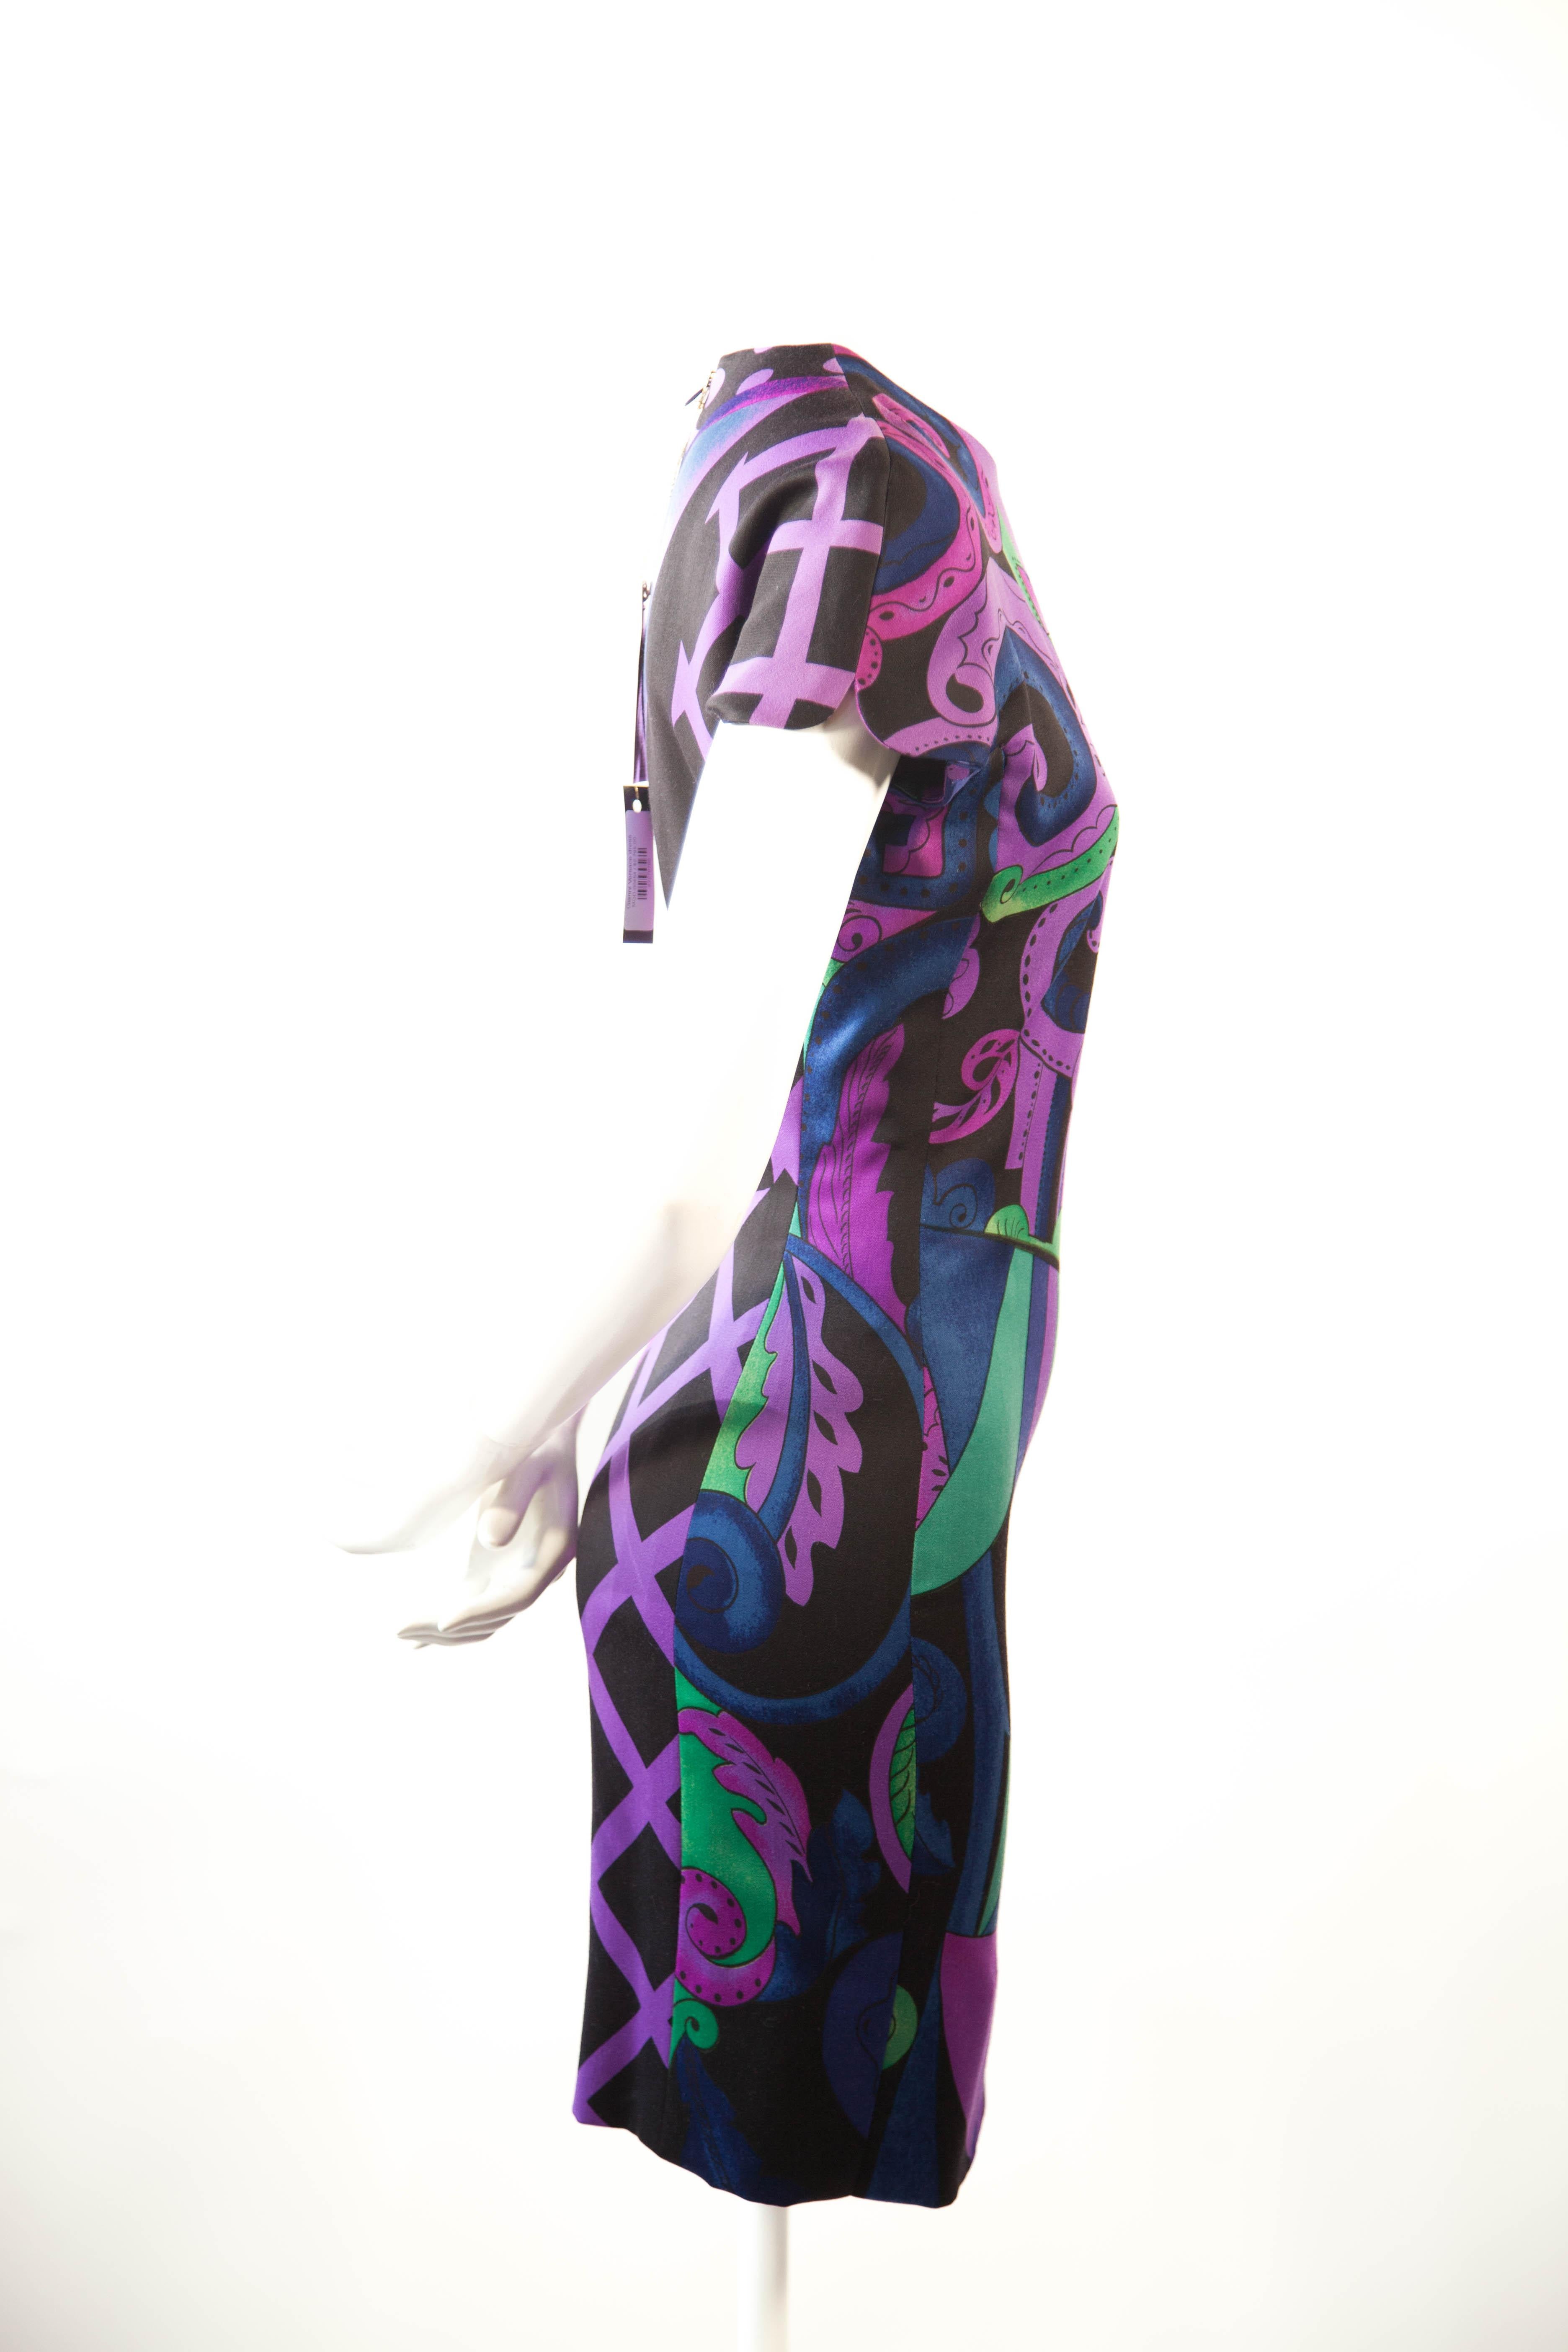 Gianni Versace, circa 1990s
Fine Wool, Abstract pattern throughout in purple, blue, green and black.
Silk lined in purple 
Cap sleeves, Jewel neckline.
Midi-Length
